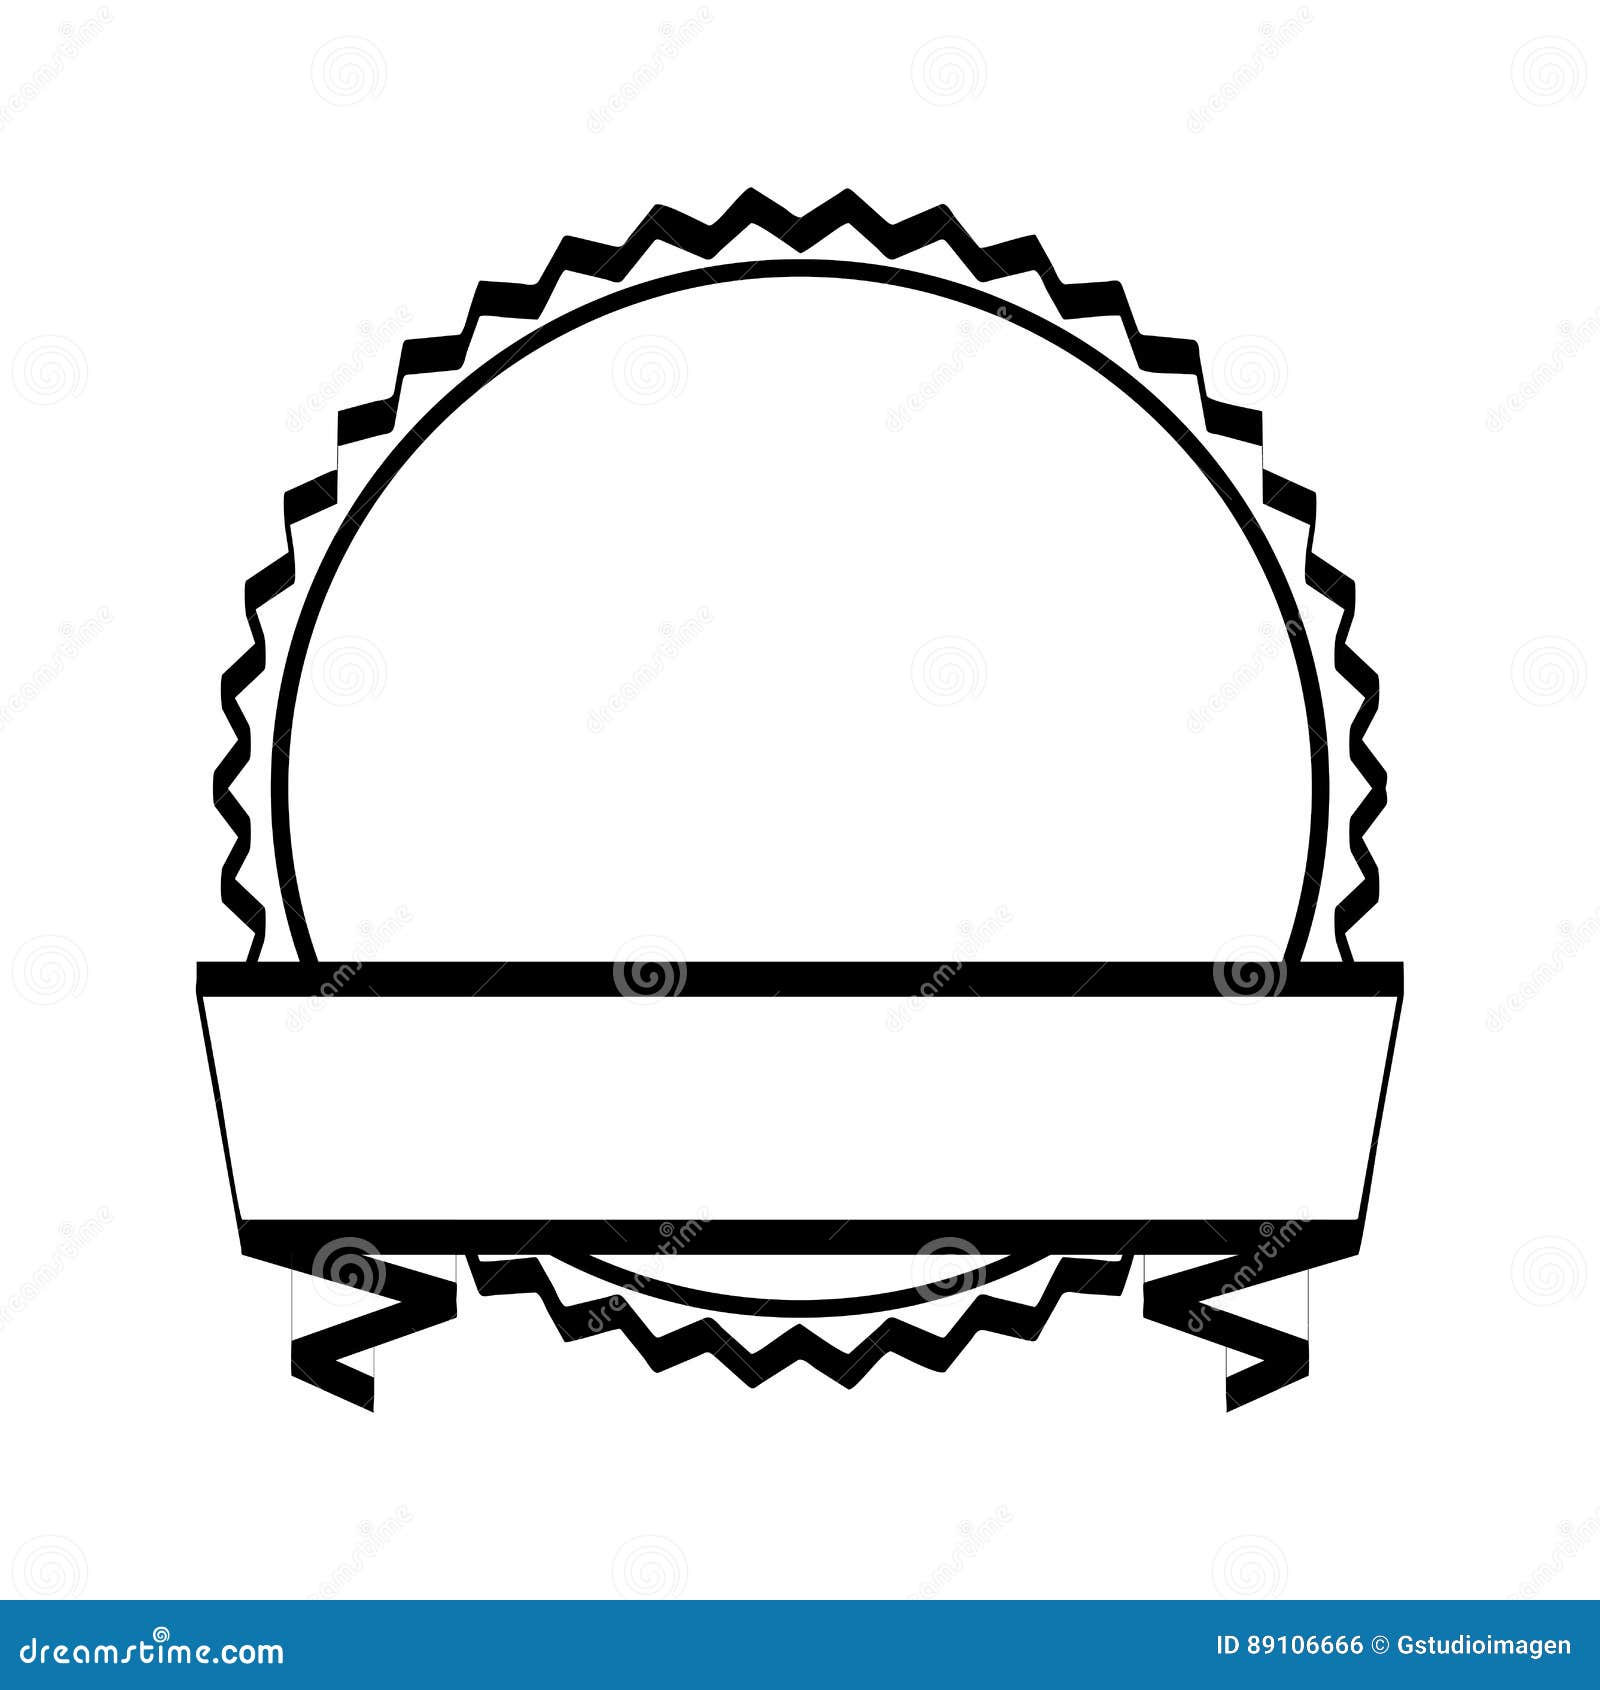 Seal frame with ribbon stock vector. Illustration of decoration - 89106666